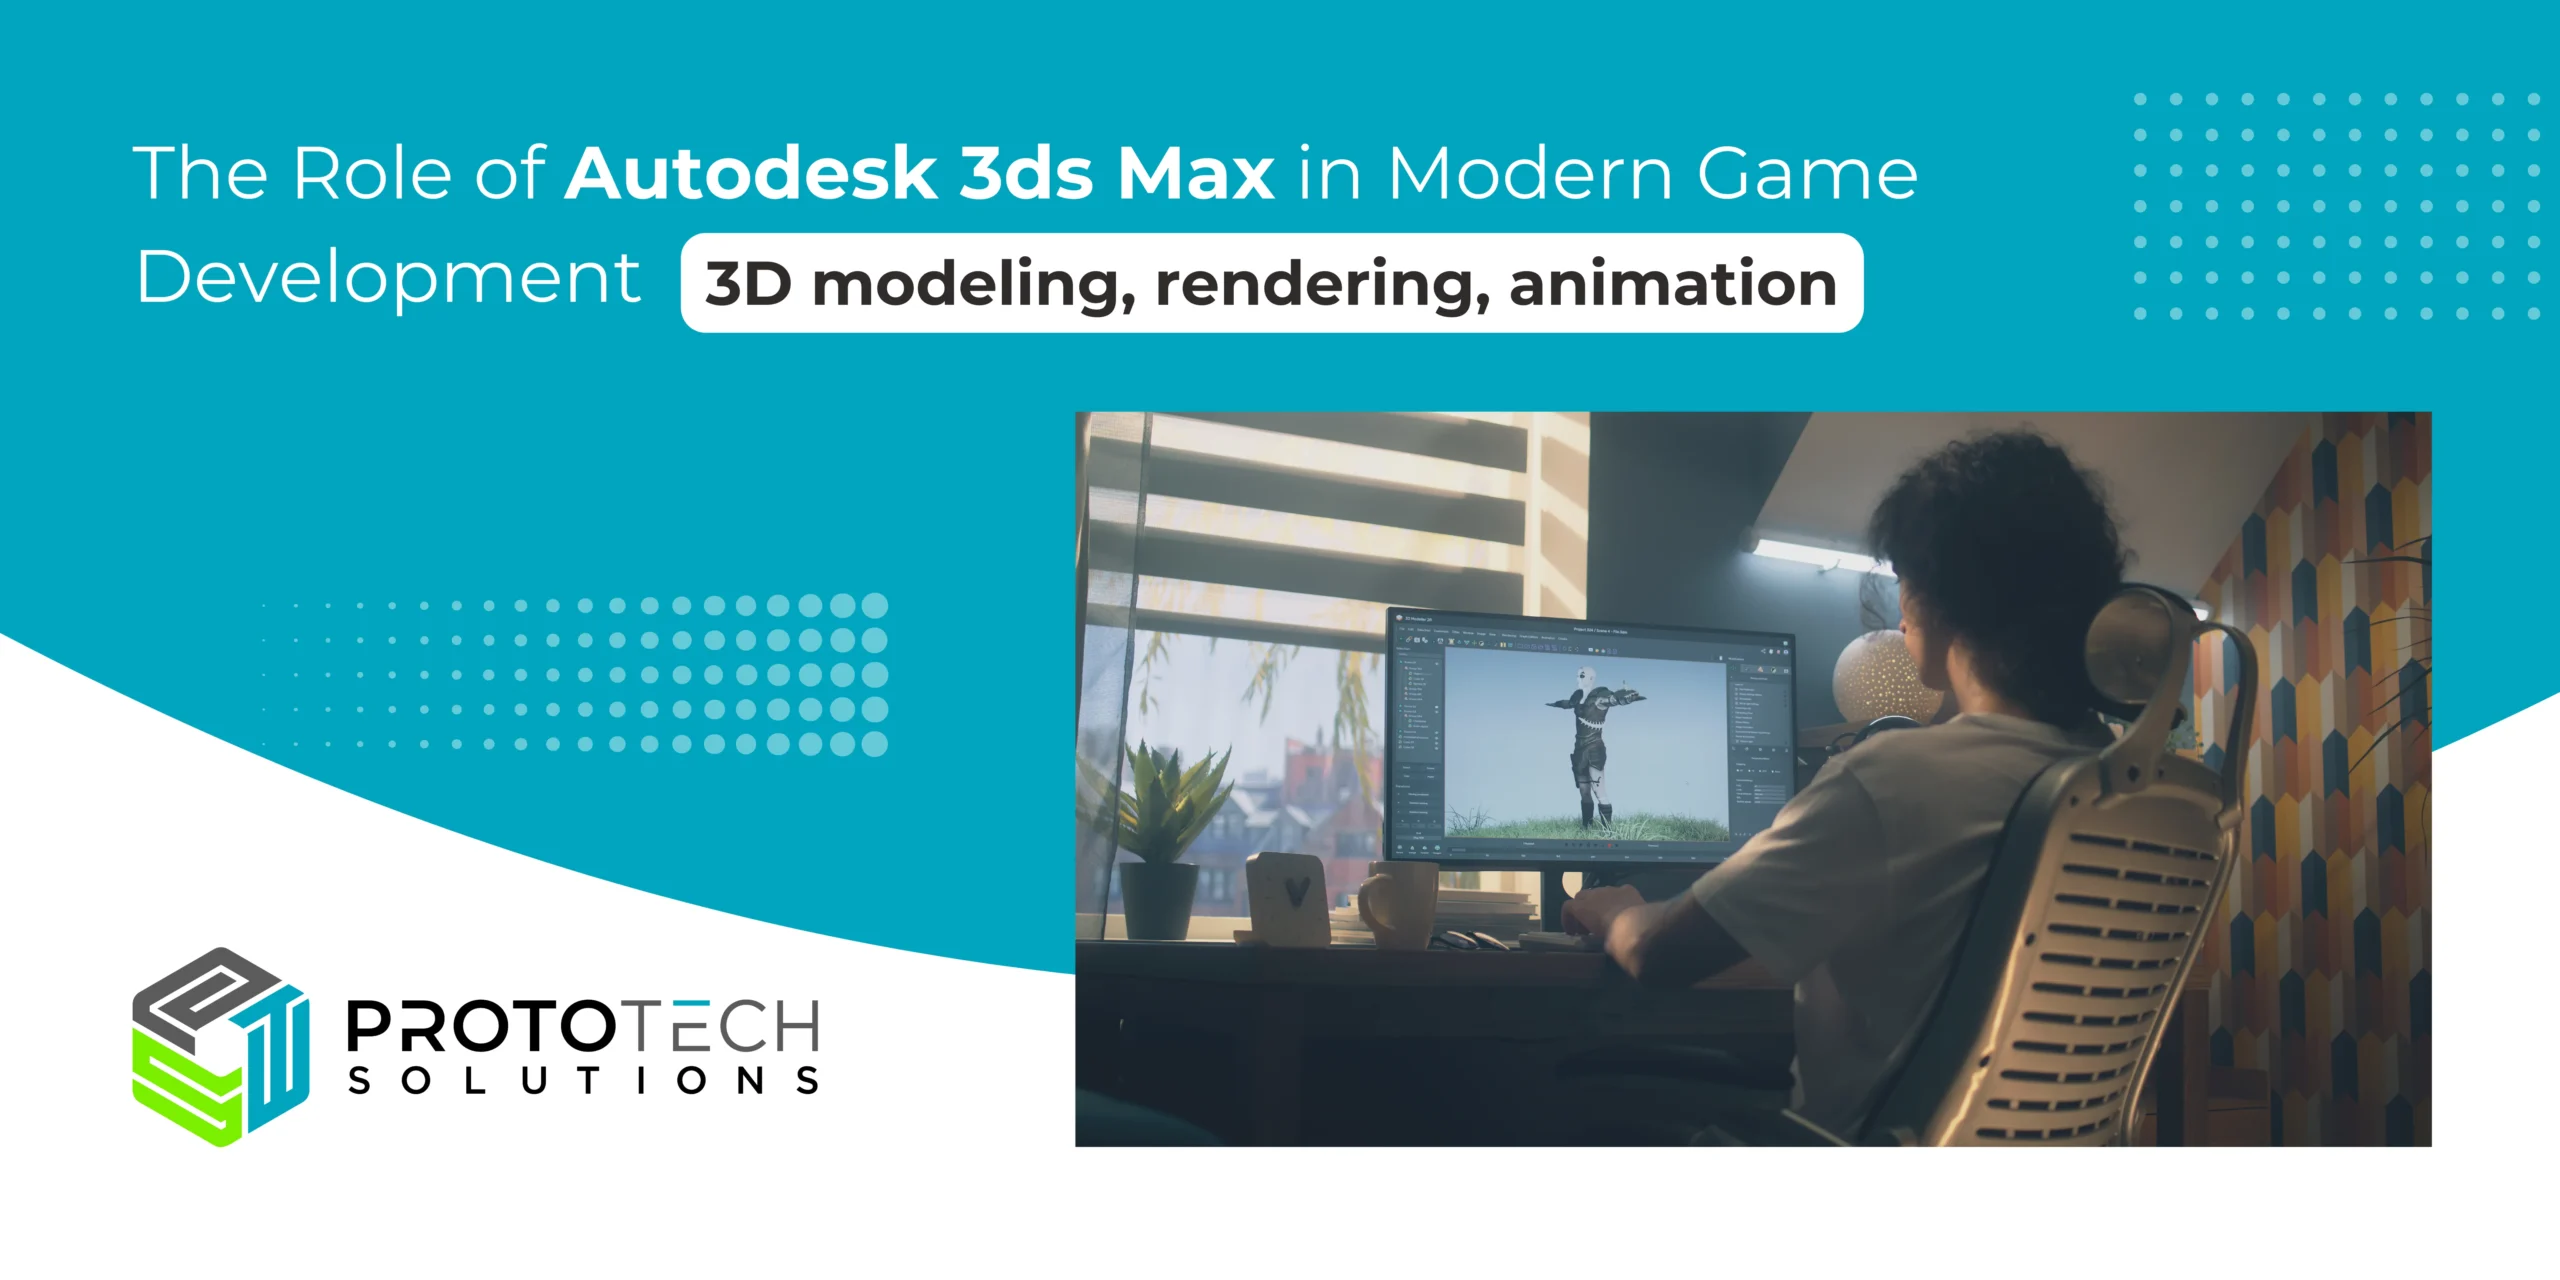 The Role of Autodesk 3ds Max in Modern Game Development